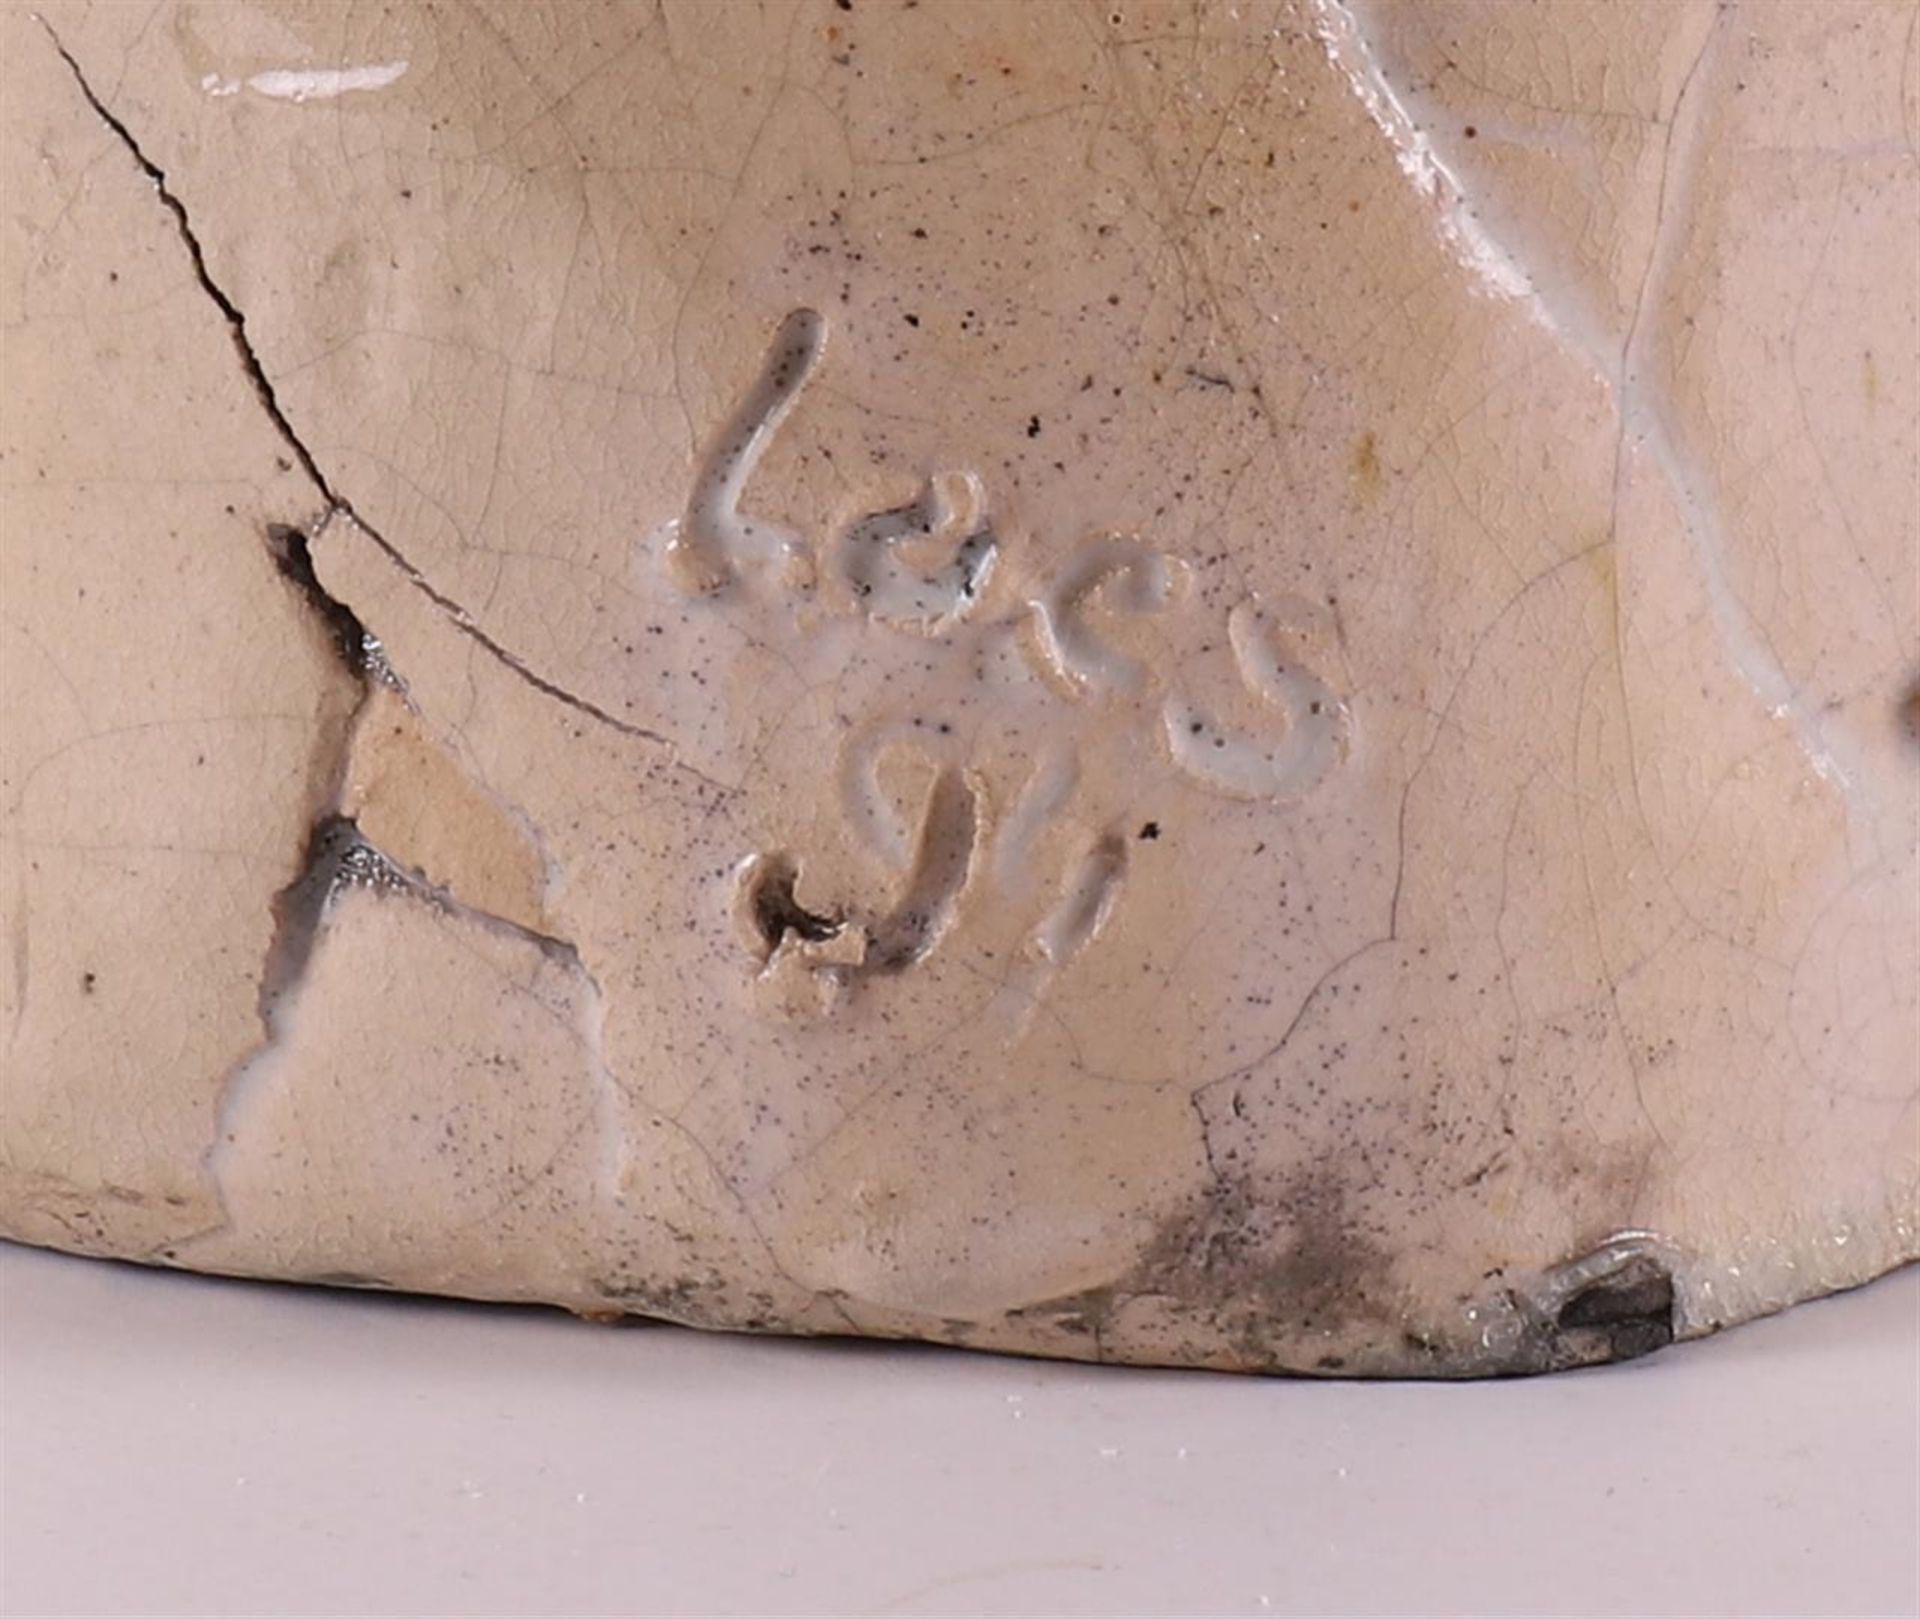 A polychrome ceramic vase, signed 'Loes 91' (= possibly Loes Koster). - Bild 5 aus 7